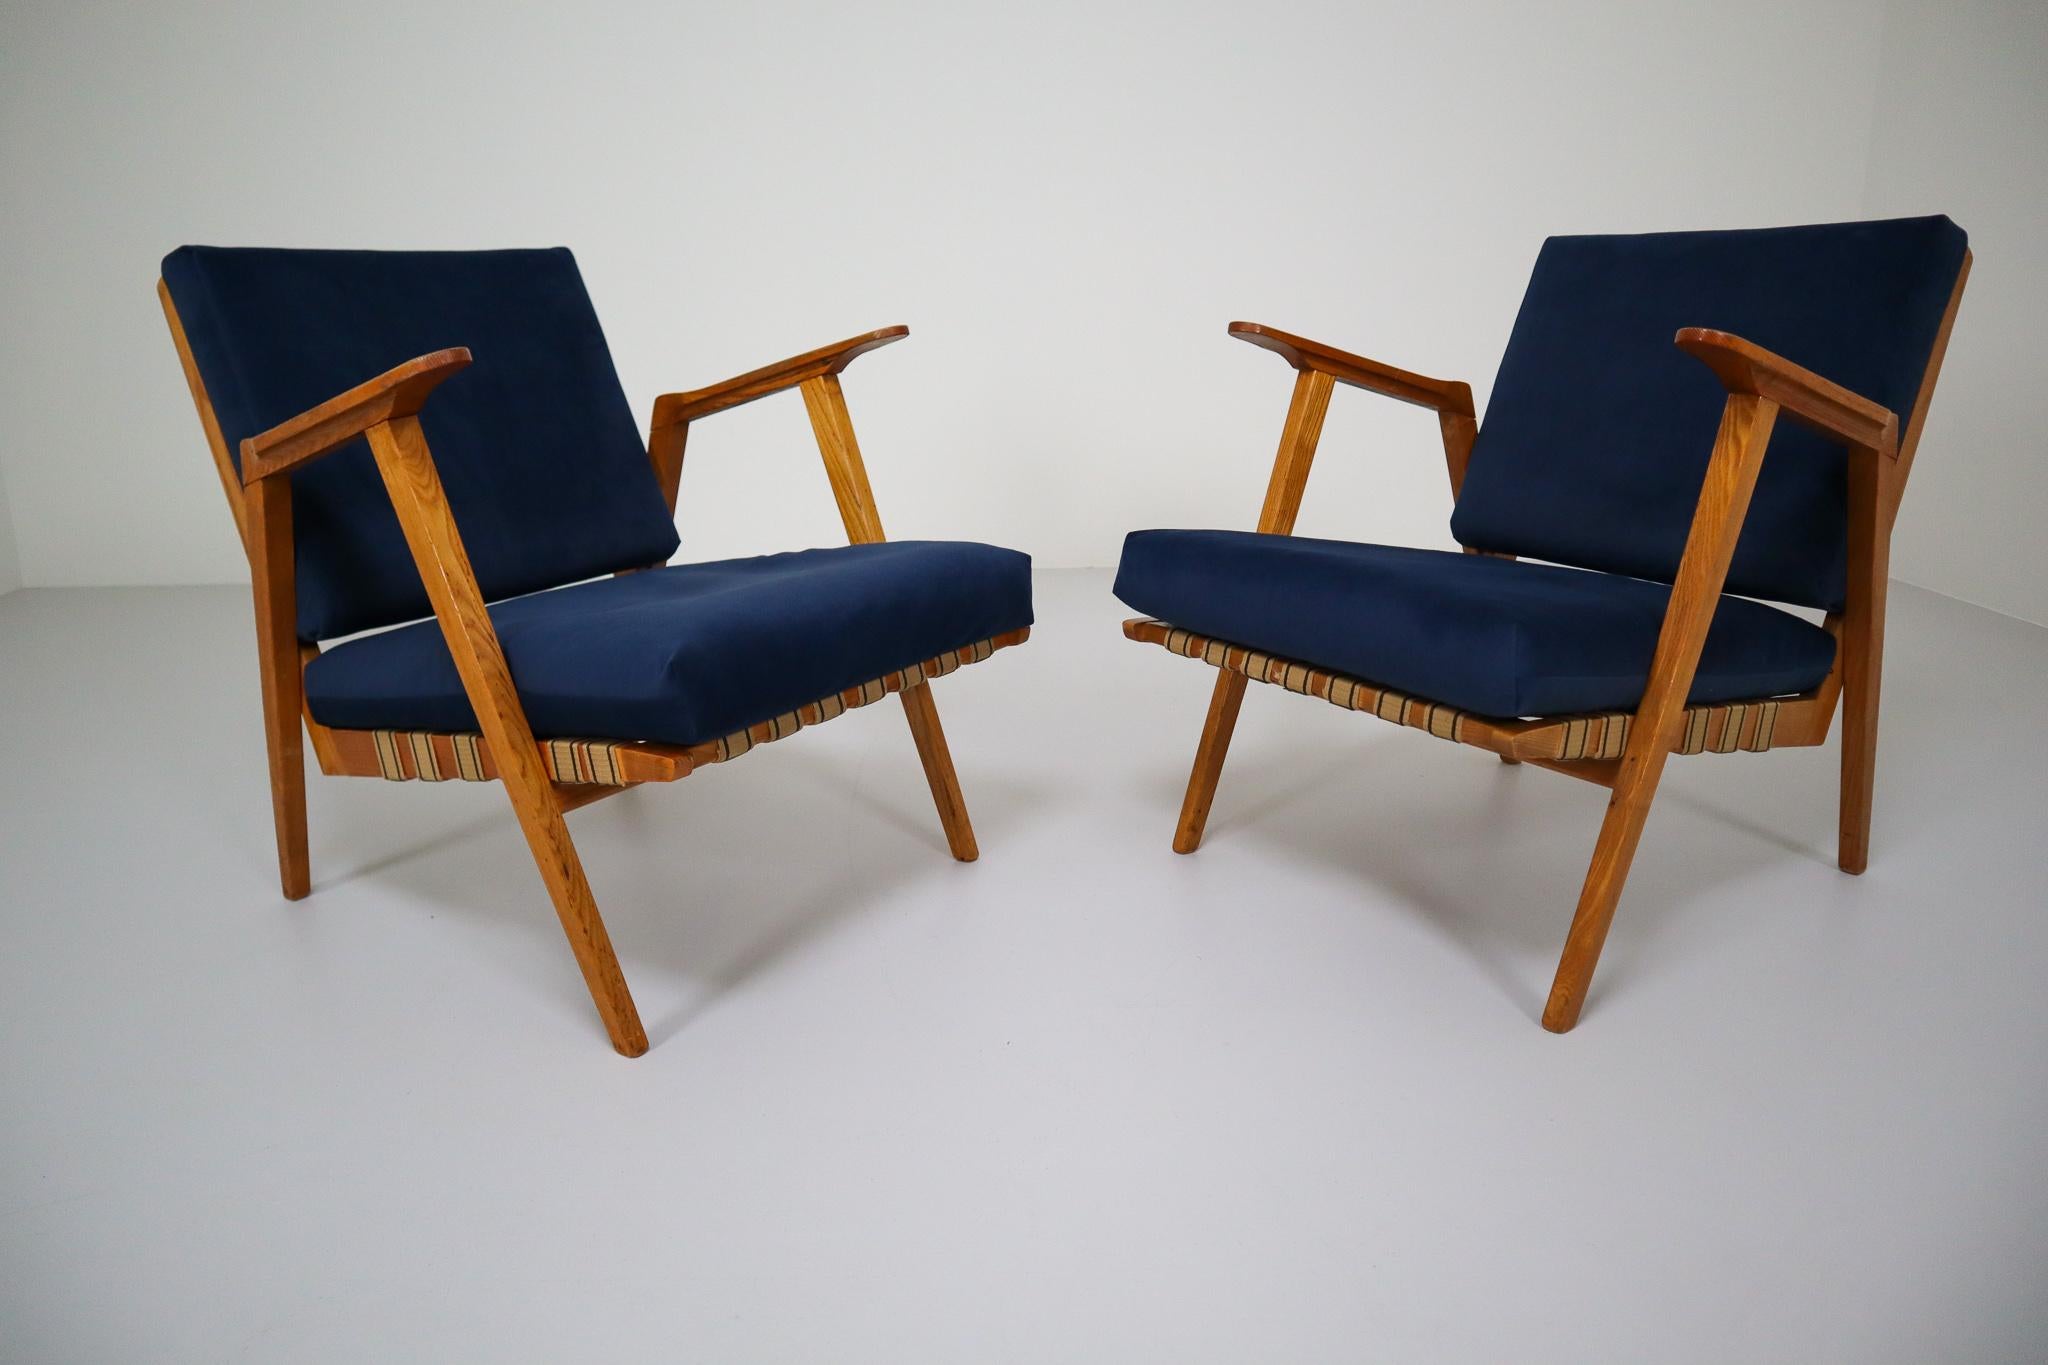 Unusually pair of original vintage midcentury armchairs / lounge chairs manufactured and designed in Czech republic 1960s. Made of ashwood and professionally reupholstered in blue velvet. These armchairs would make an eye-catching addition to any